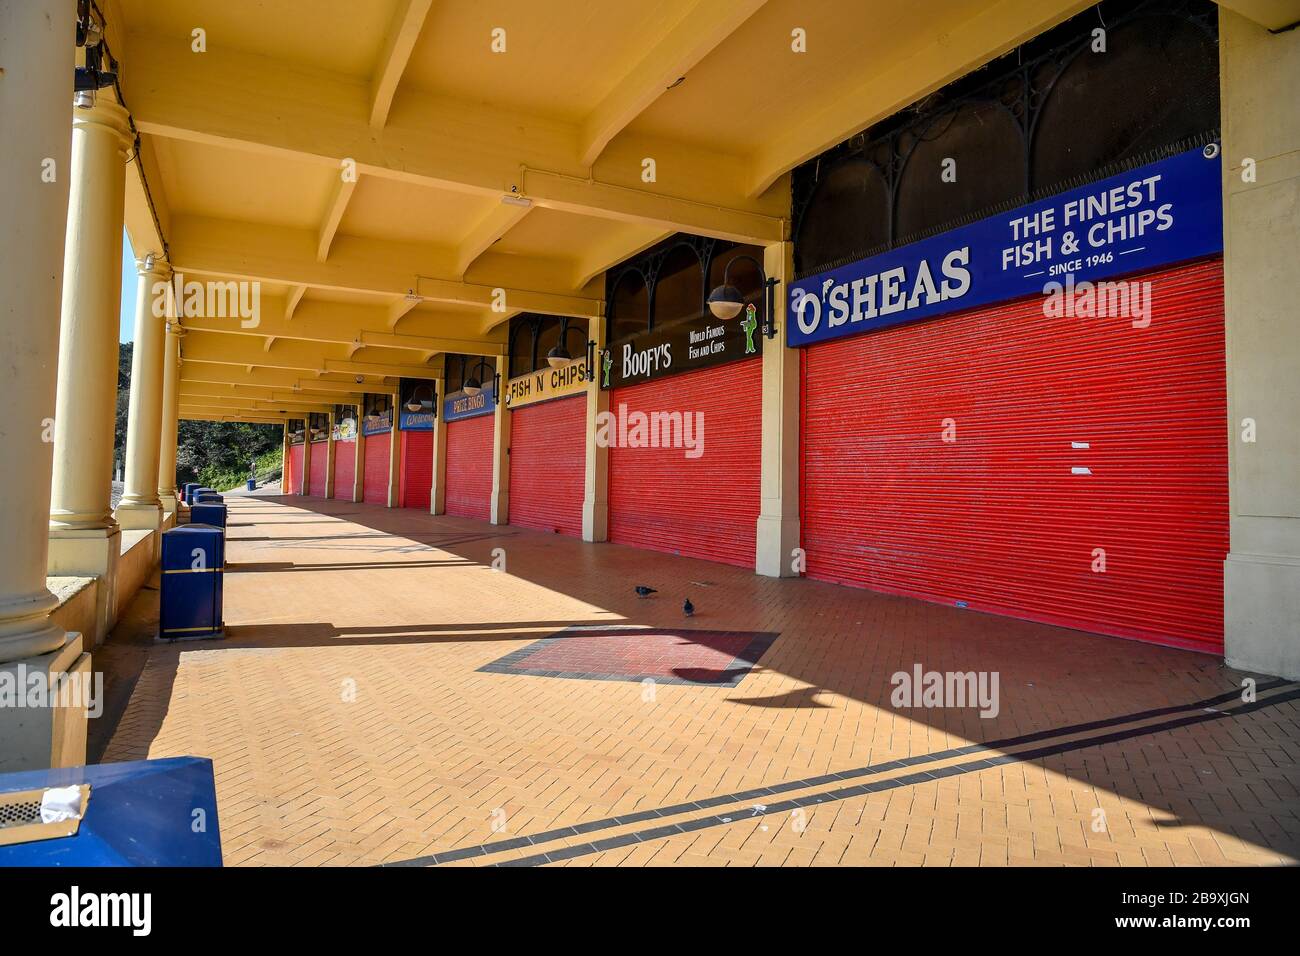 Traditional seaside shops and amusements are closed and devoid of people in Barry Island, Wales after Prime Minister Boris Johnson has put the UK in lockdown to help curb the spread of the coronavirus. Stock Photo